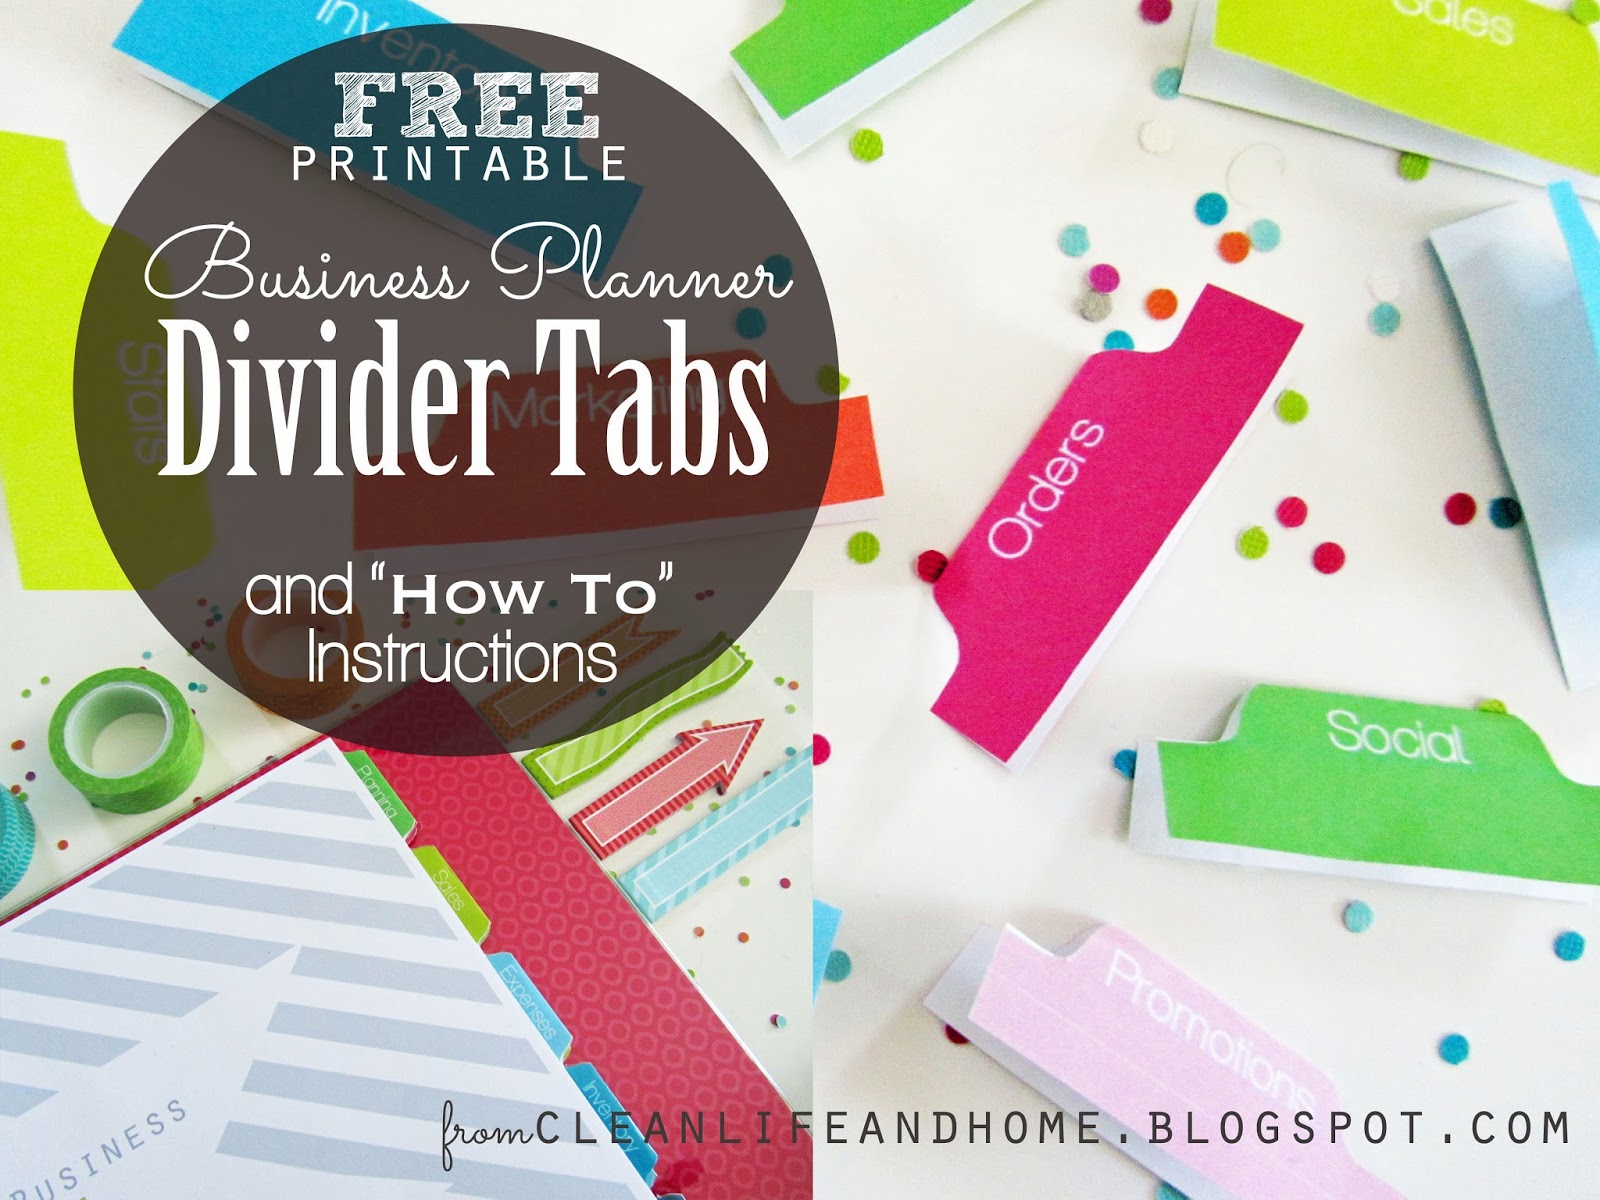 clean-life-and-home-free-printable-divider-tabs-pages-for-your